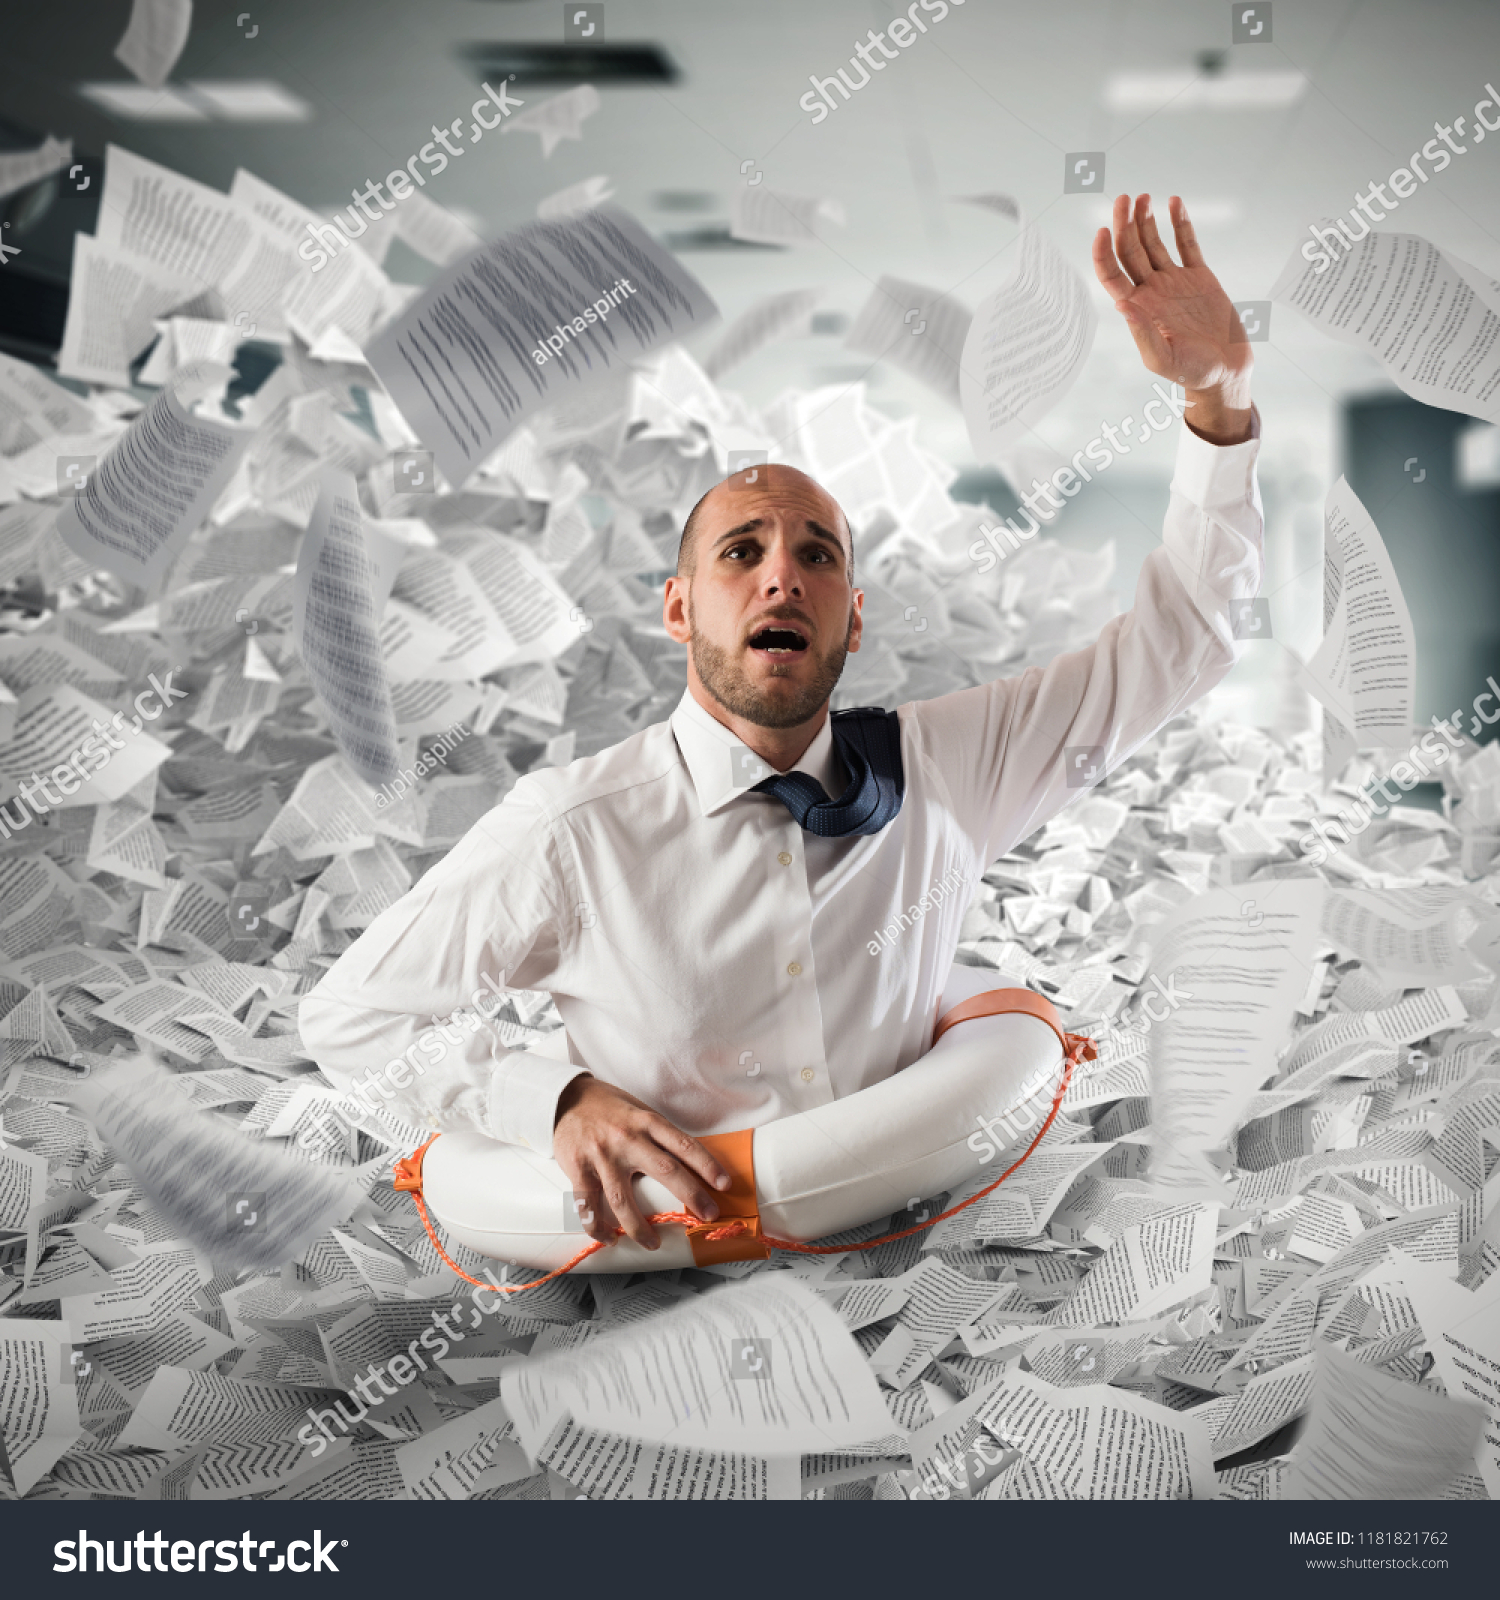 Businessman with lifebuoy sinks between worksheets in office #1181821762